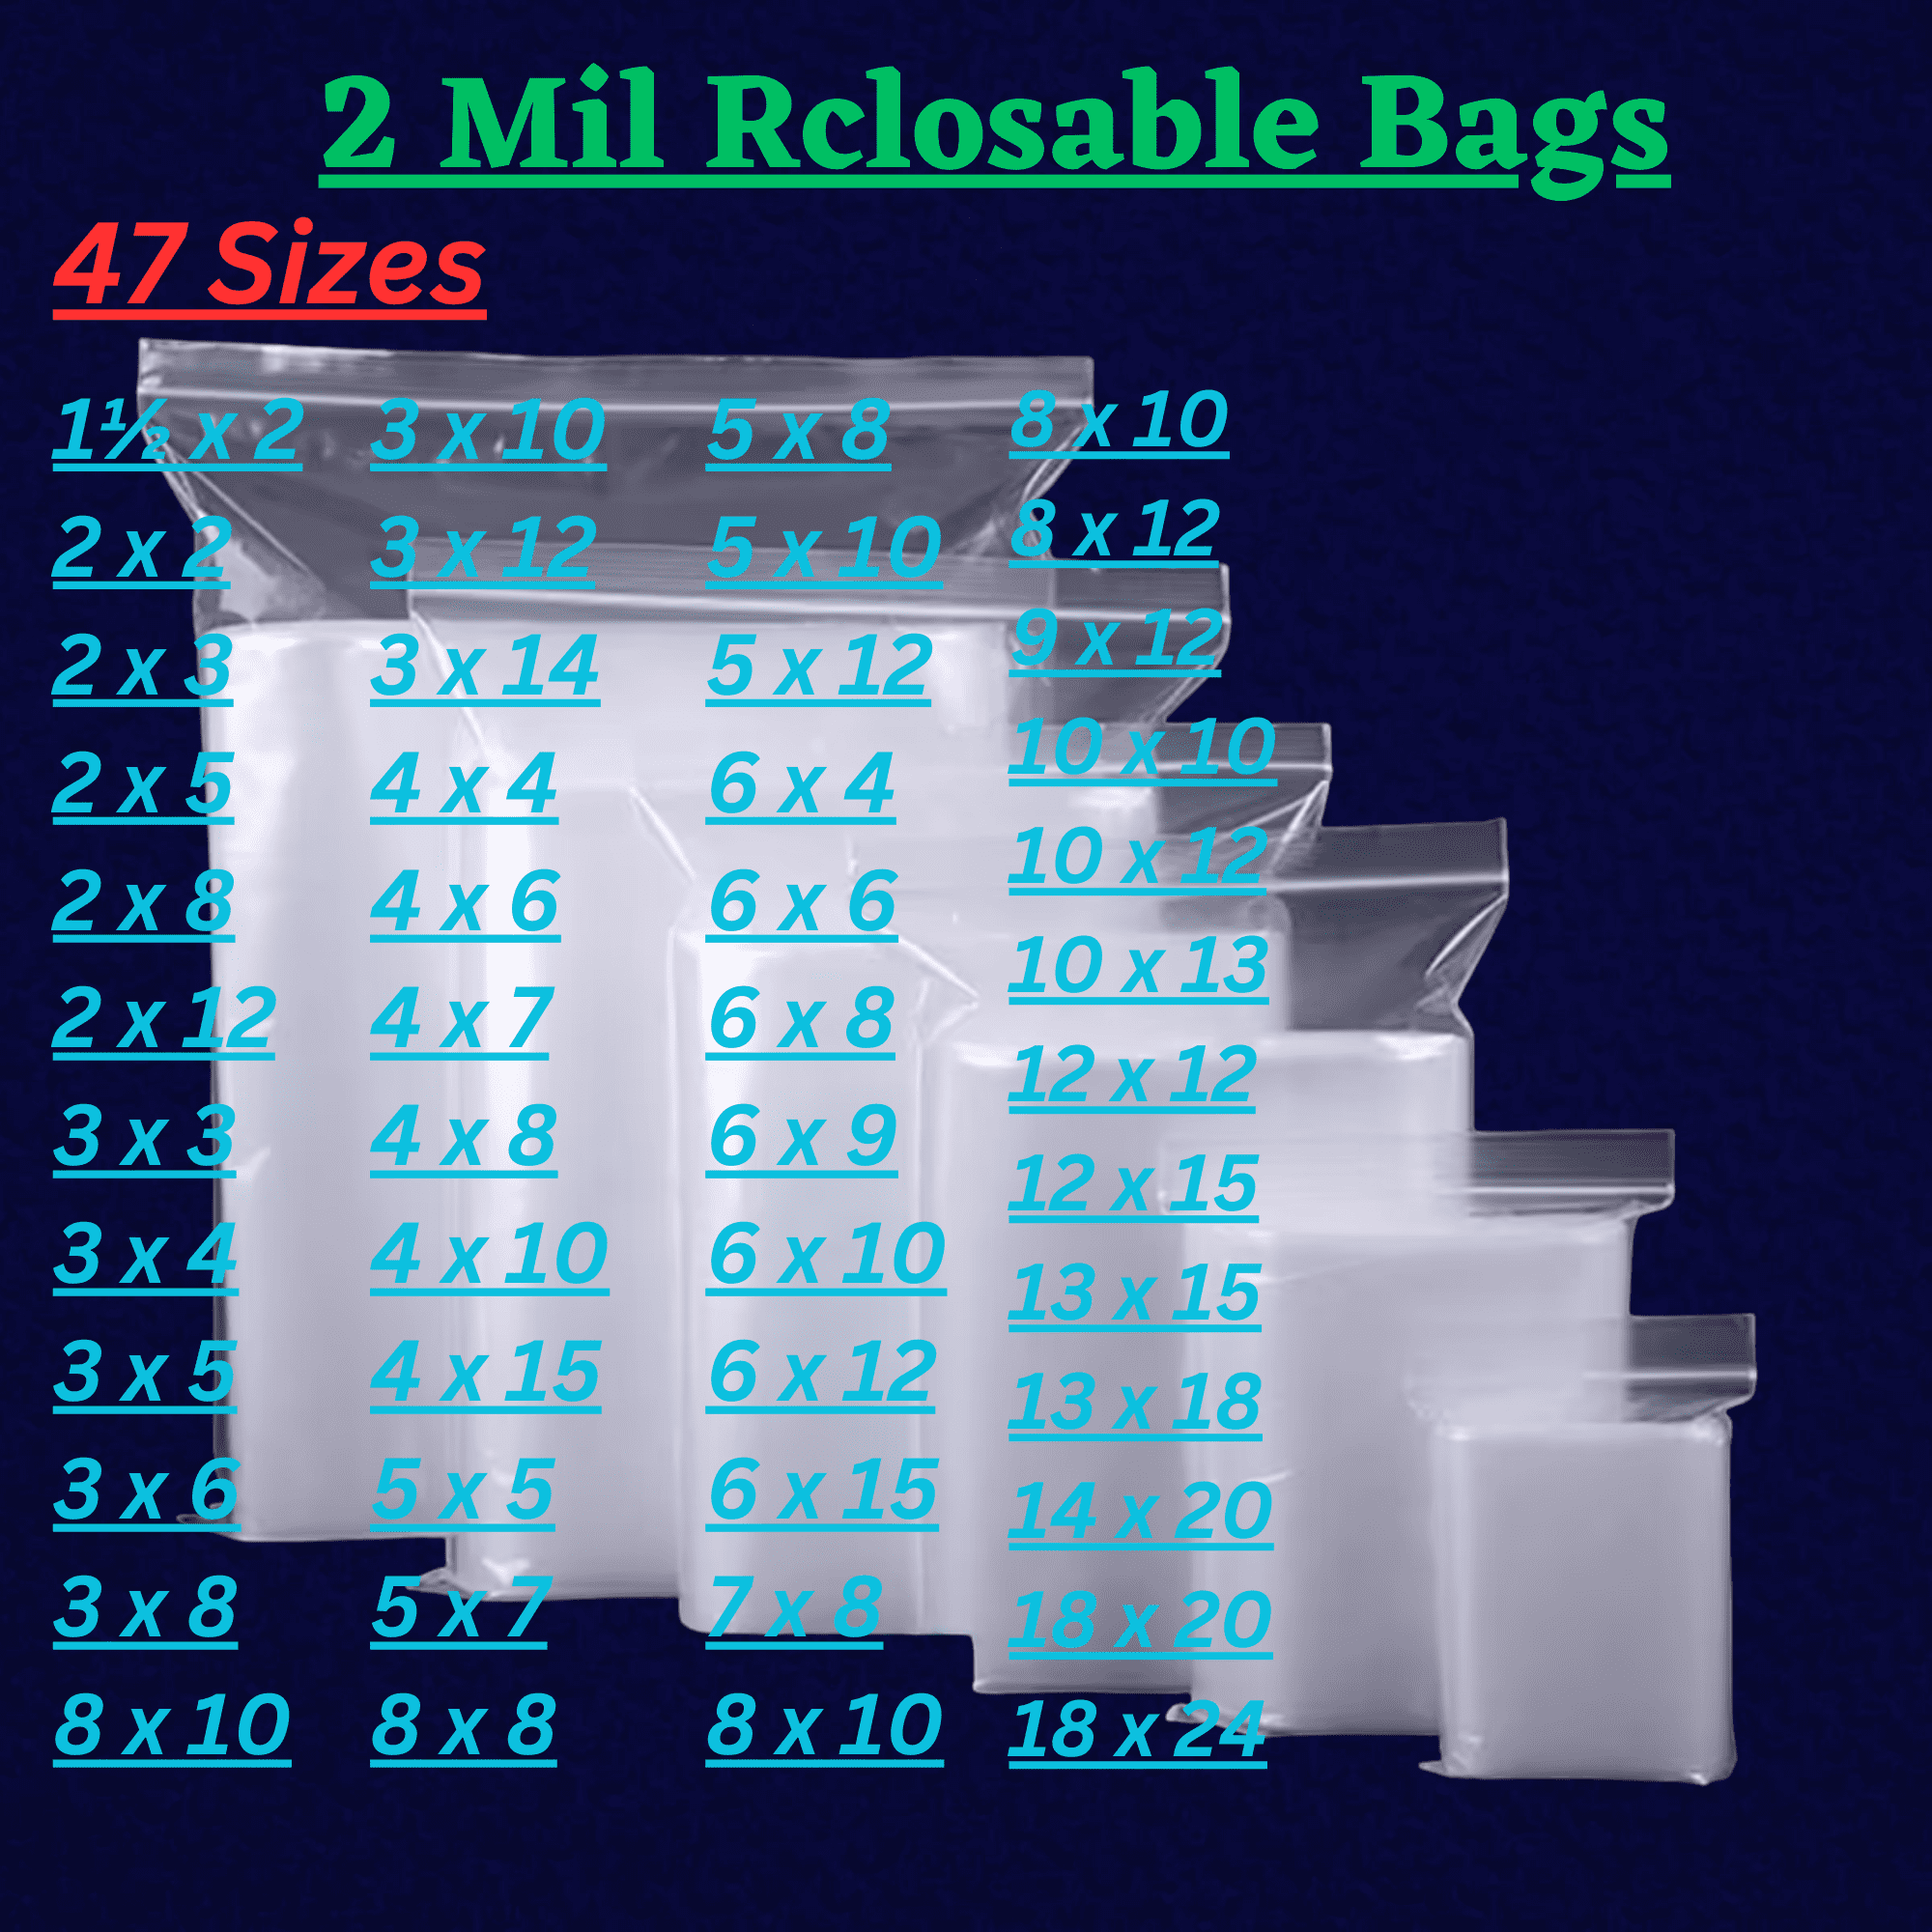 100ct, 10 x 12 Reclosable Zip Poly Bags 2 mil, BPA-Free, Clear, Durable, Packaging & Storing